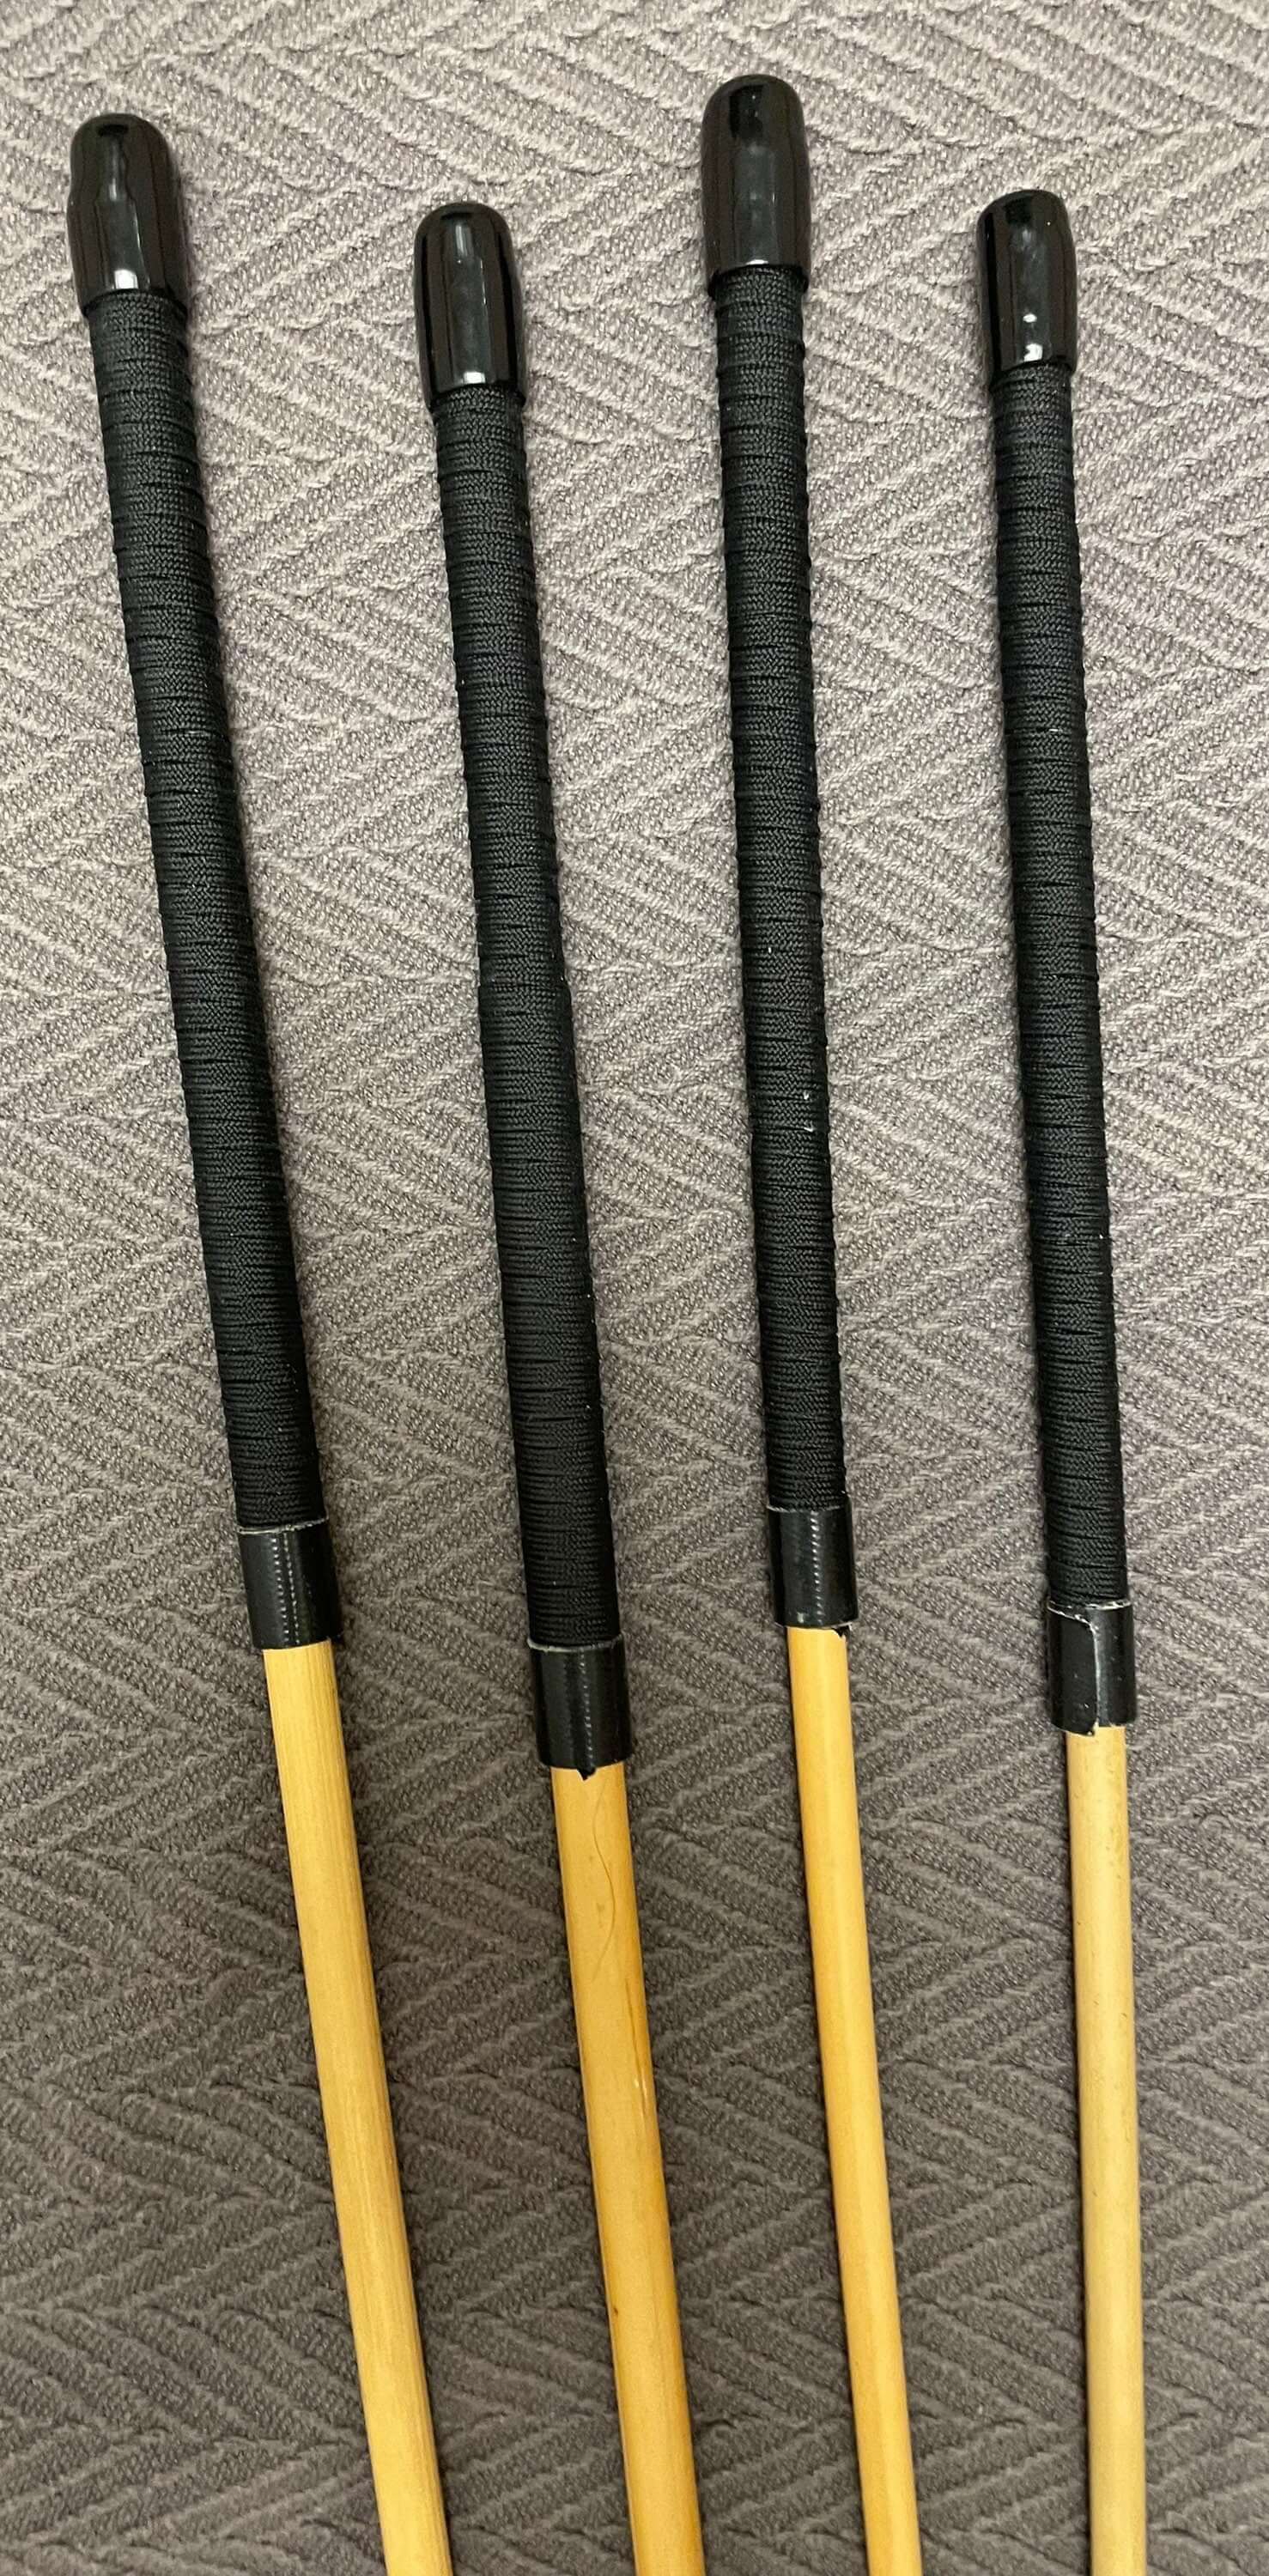 Set of 4 Dragon Canes with Black Paracord Handles